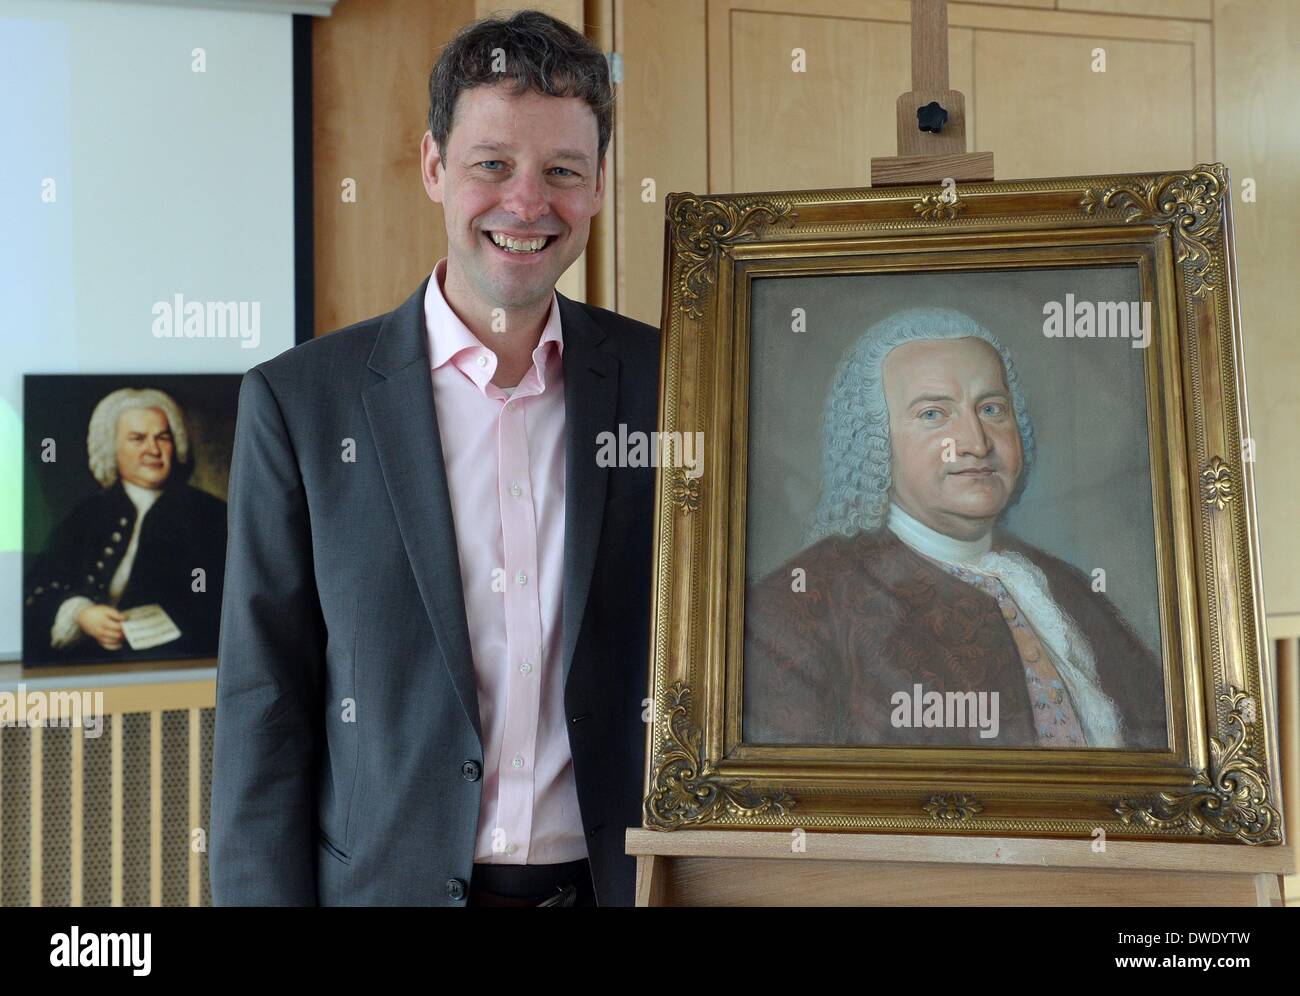 Berlin, Germany. 06th Mar, 2014. Joerg Hansen, Director of the Bachhaus Eisenach, stands next to a likely authentic portrait of Johann Sebastian Bach in Berlin, Germany, 06 March 2014. The Bachhaus Eisenach acquired the pastel picture as it is thought to be the lost Bach portrait from the collection of his son Carl Philipp Emanuel in the background is a print of the Bach portrait by painter Elias Gottlob Haumann. Photo: Britta Pedersen/dpa/Alamy Live News Stock Photo